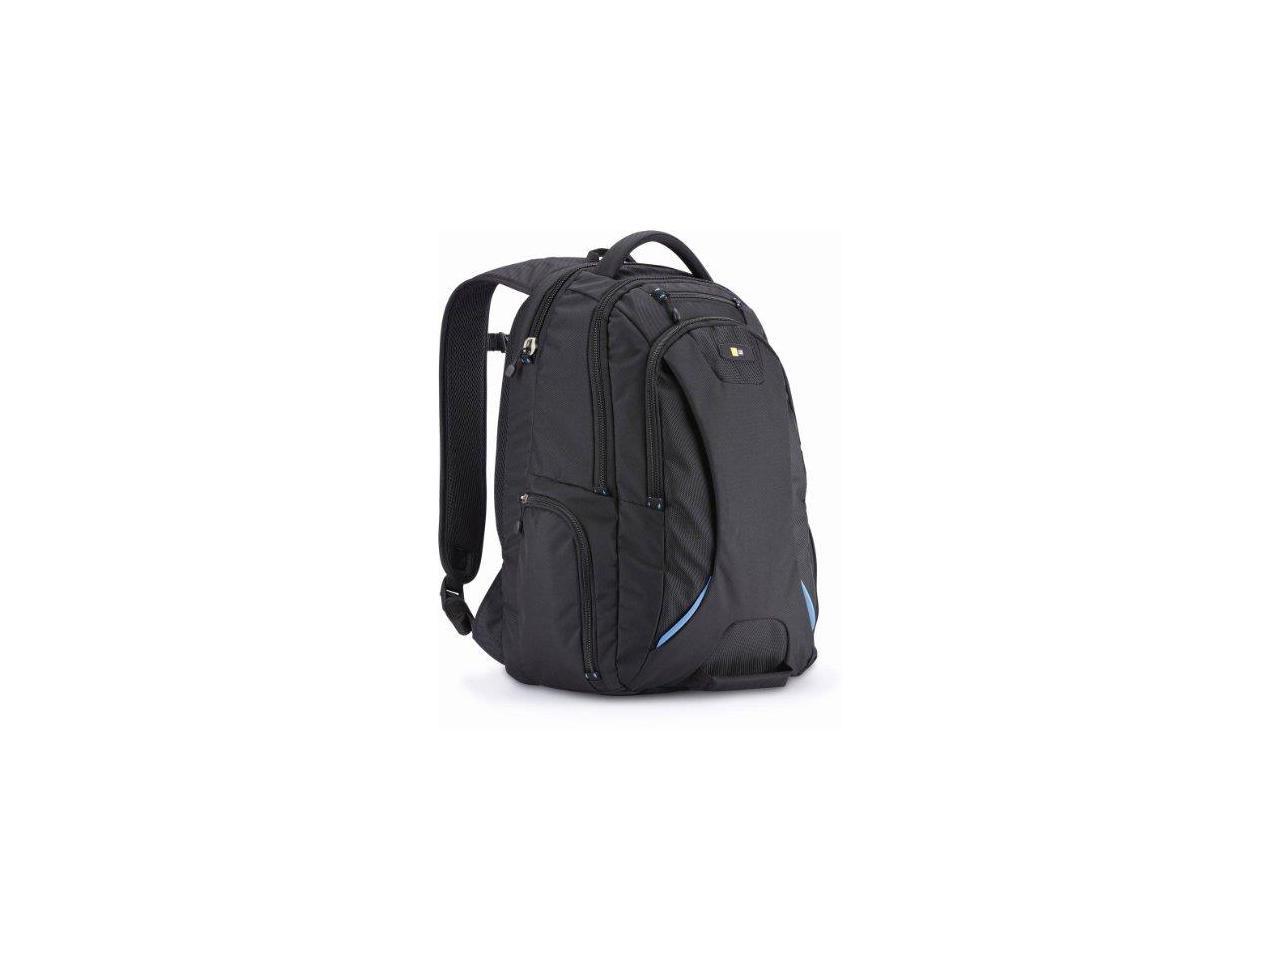 CASE LOGIC 3201672 15 6 Laptop and Tablet Backpa